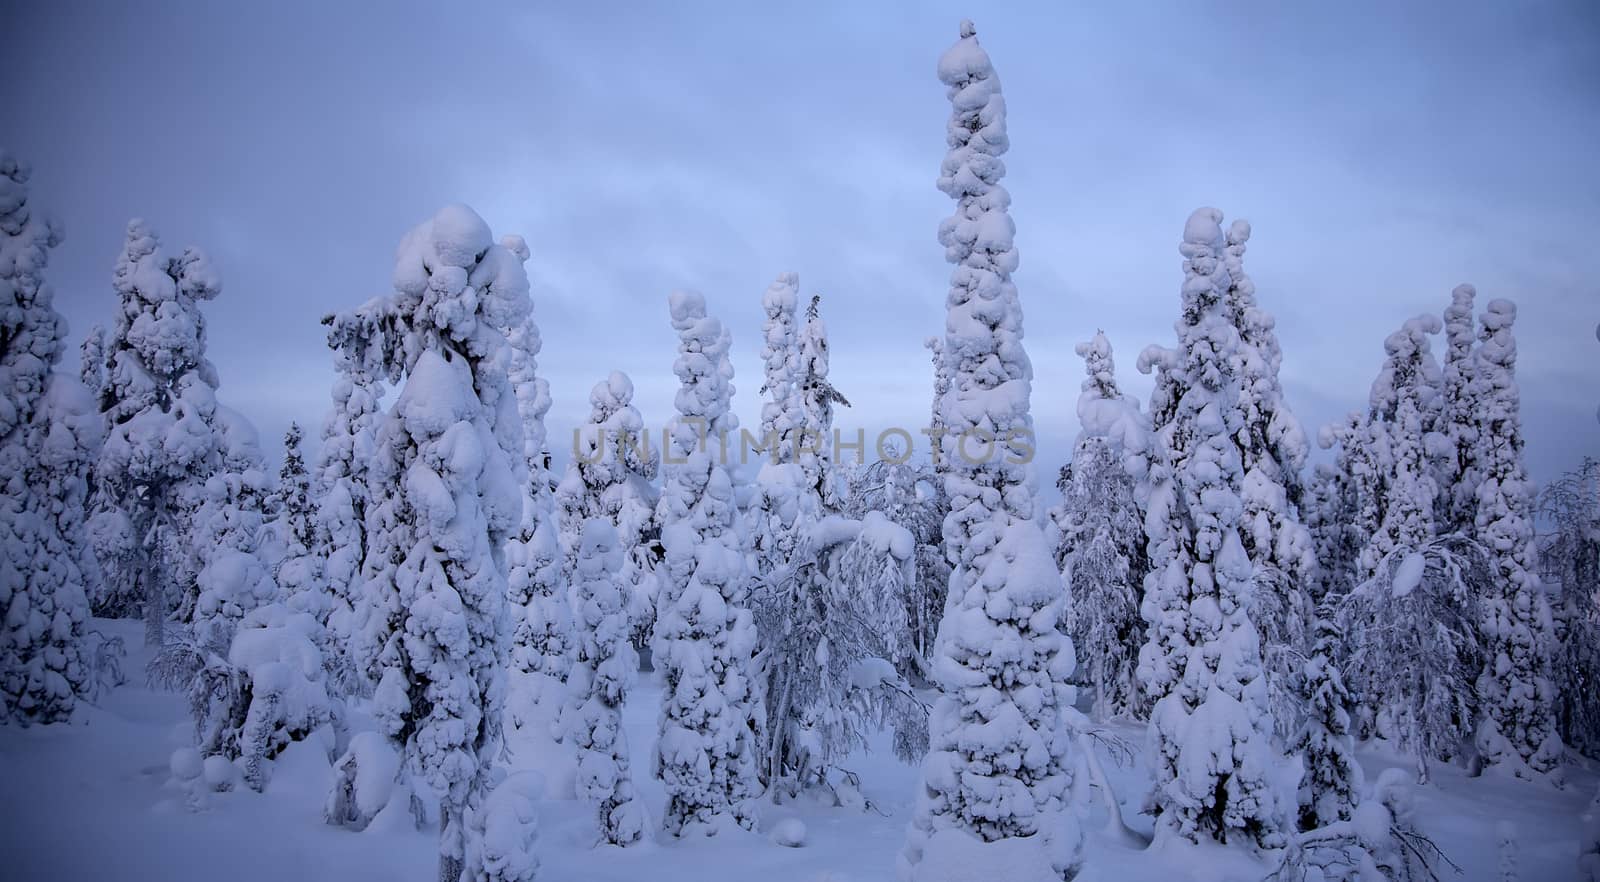 Night forest under snow in winter at Finland after snowfall